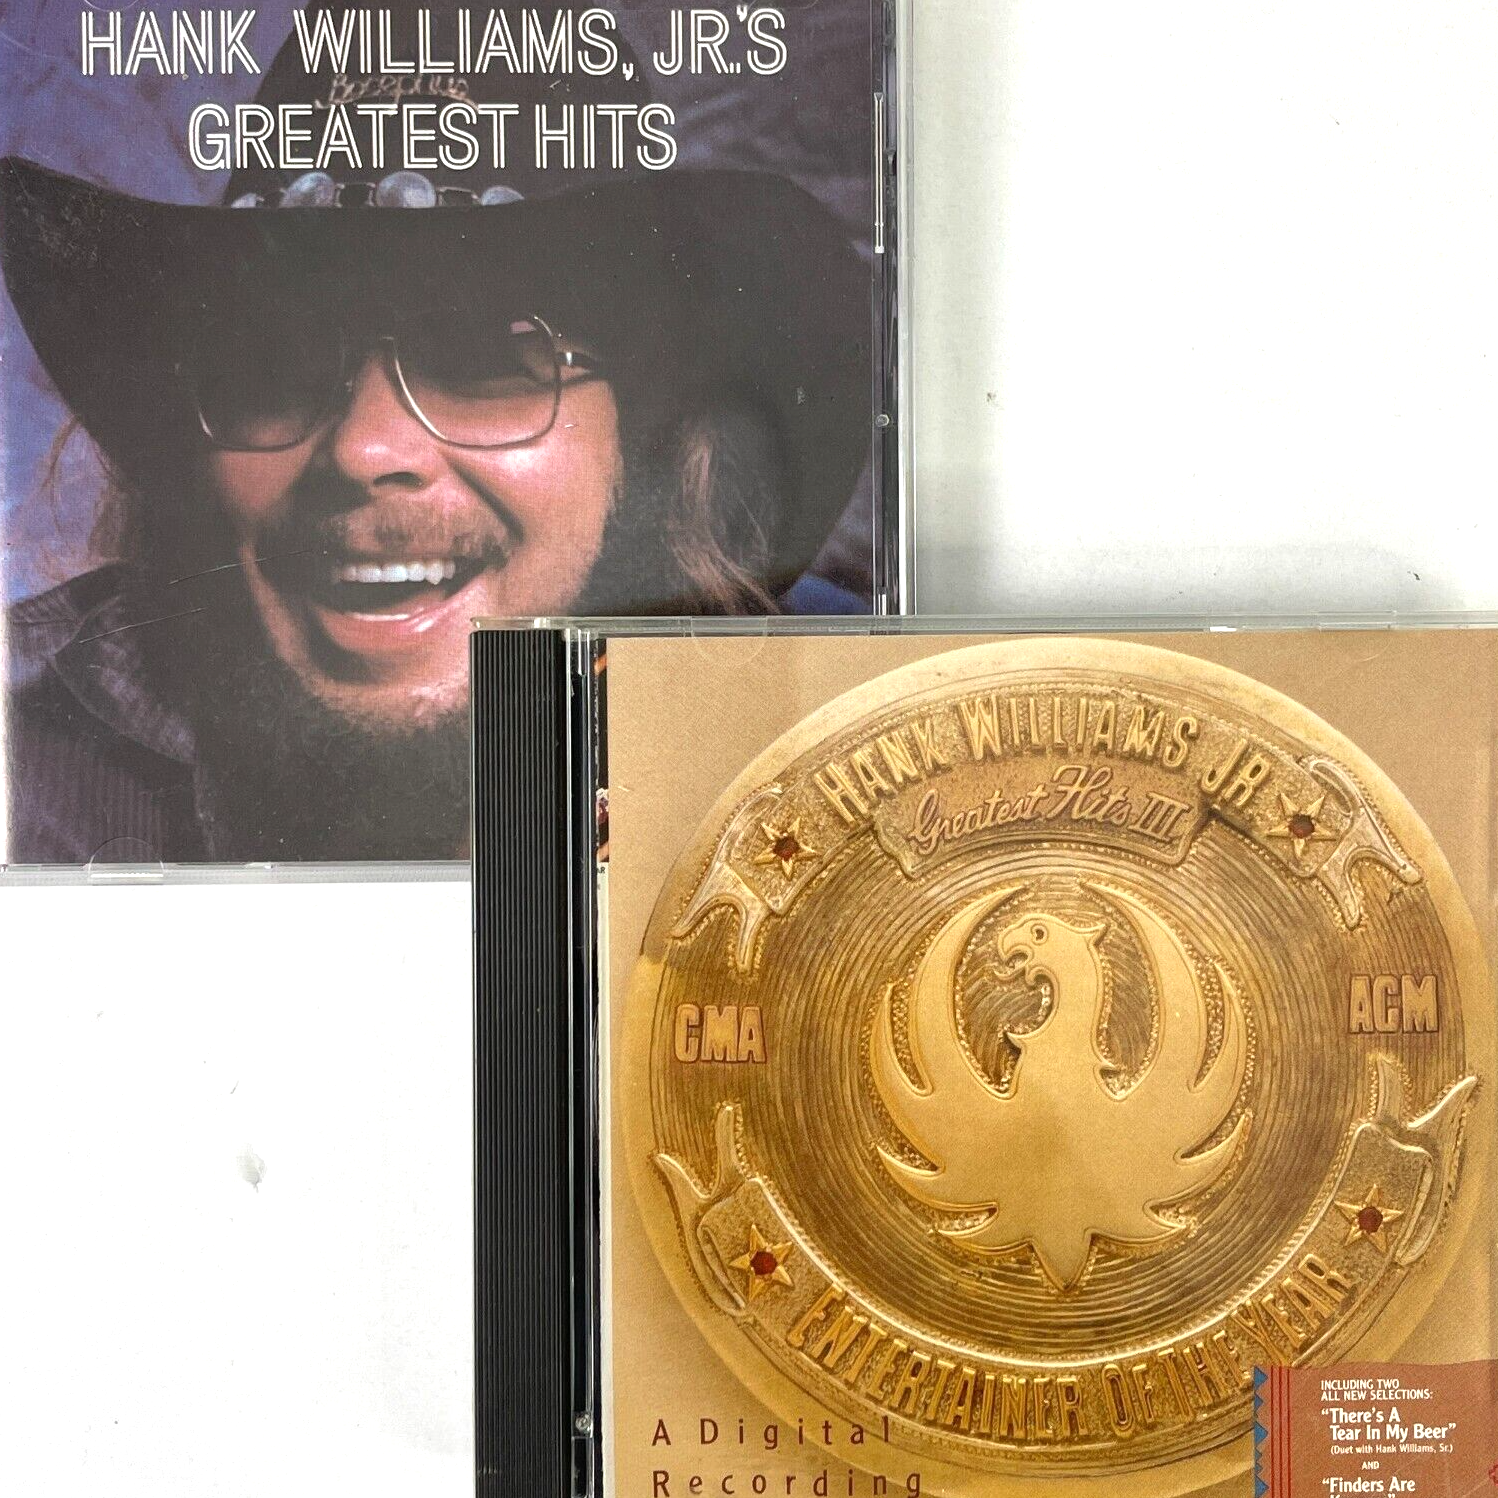 Primary image for Hank Williams Jr 2 CD Bundle Greatest HIts I + III Country 1982-1989